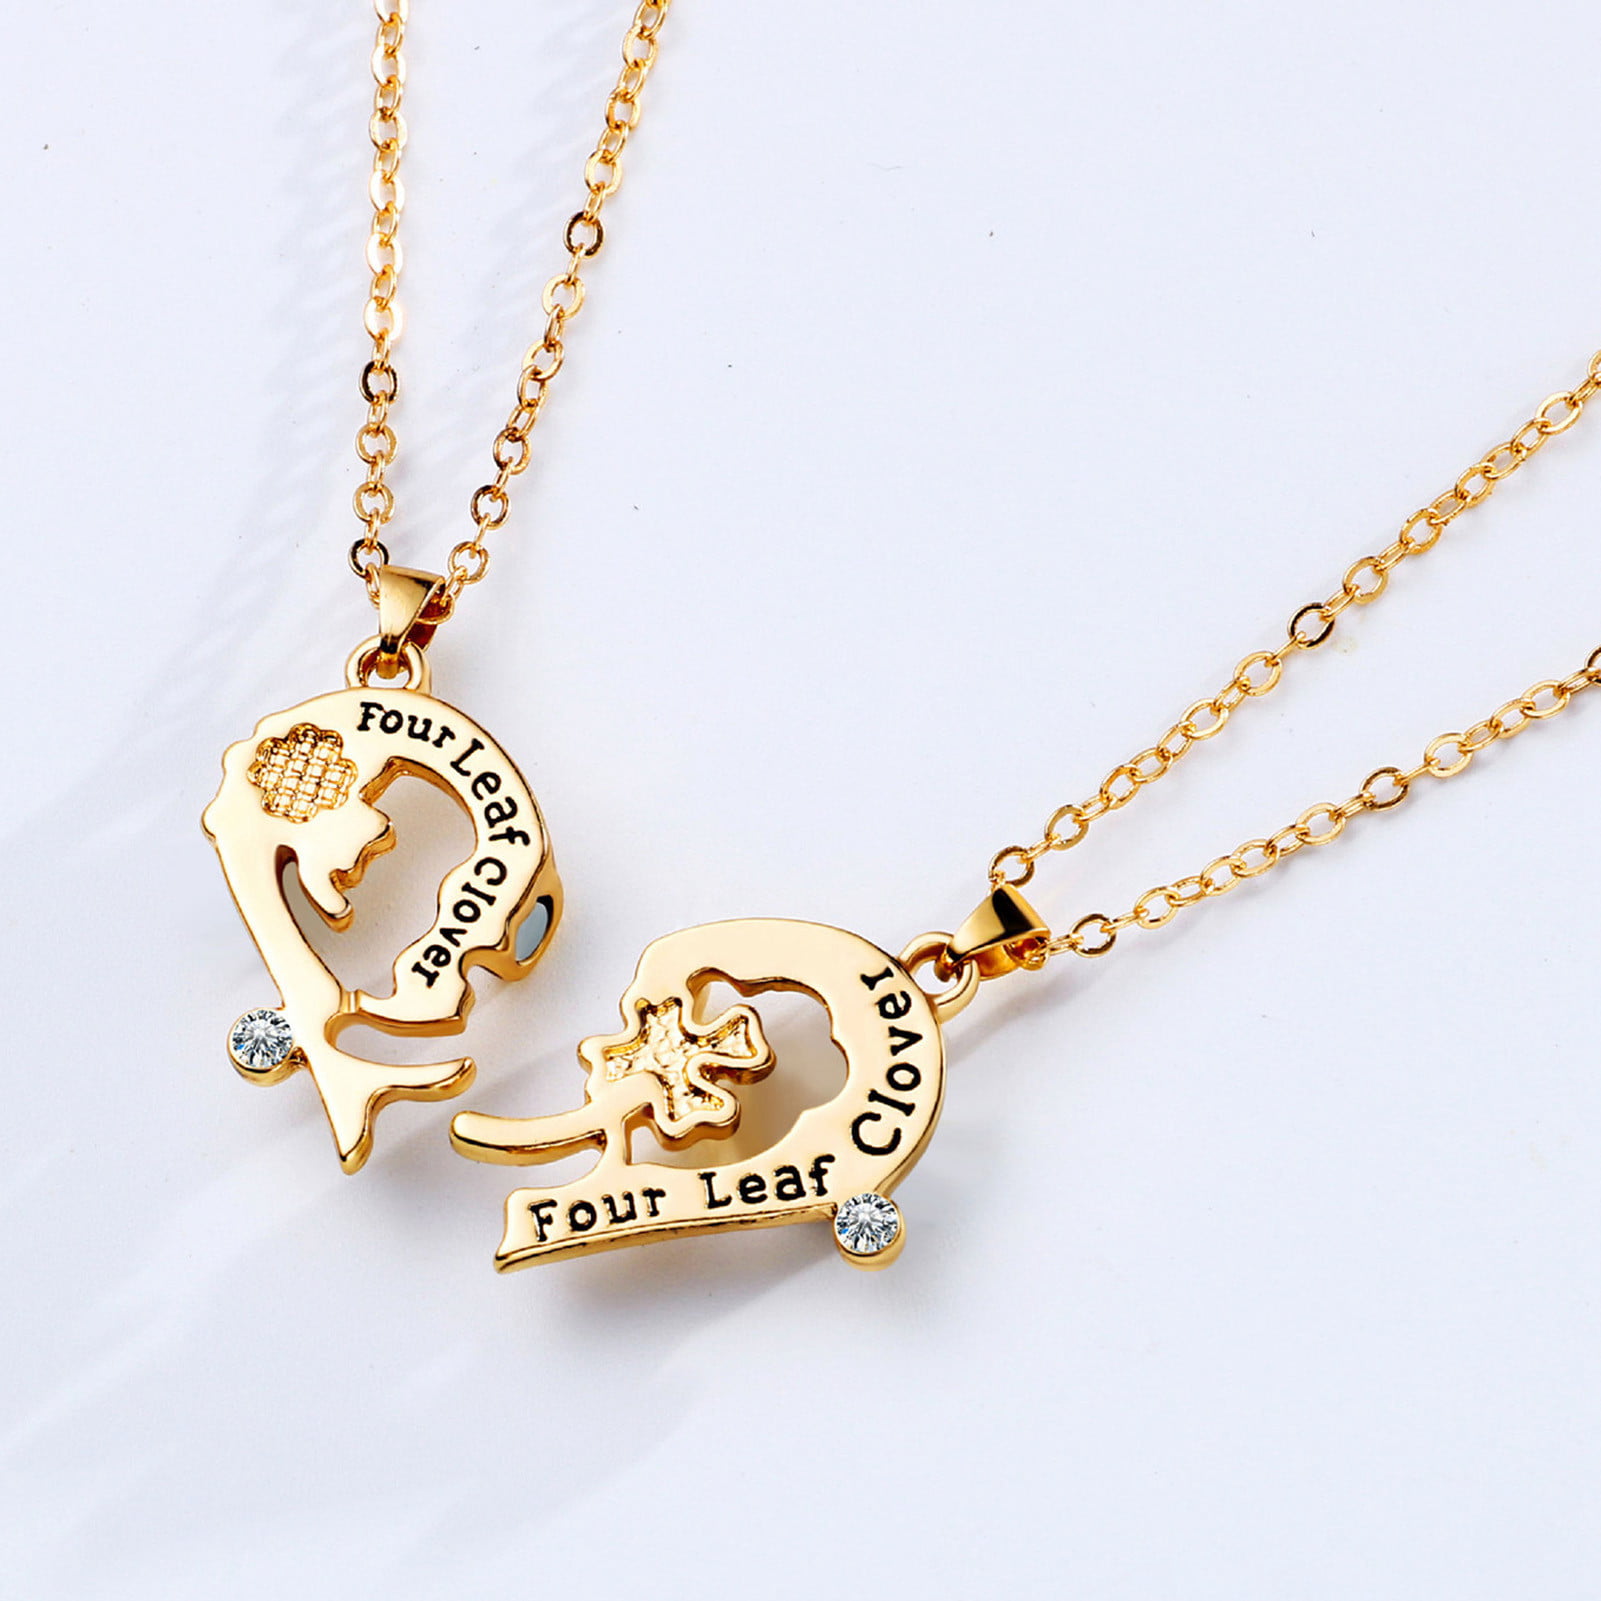 Uloveido Gold Plated Crown Love Heart Lock & Shield Key Pendant Necklace Set Charms His and Hers Couples Jewelry Y844, Adult Unisex, Size: One Size